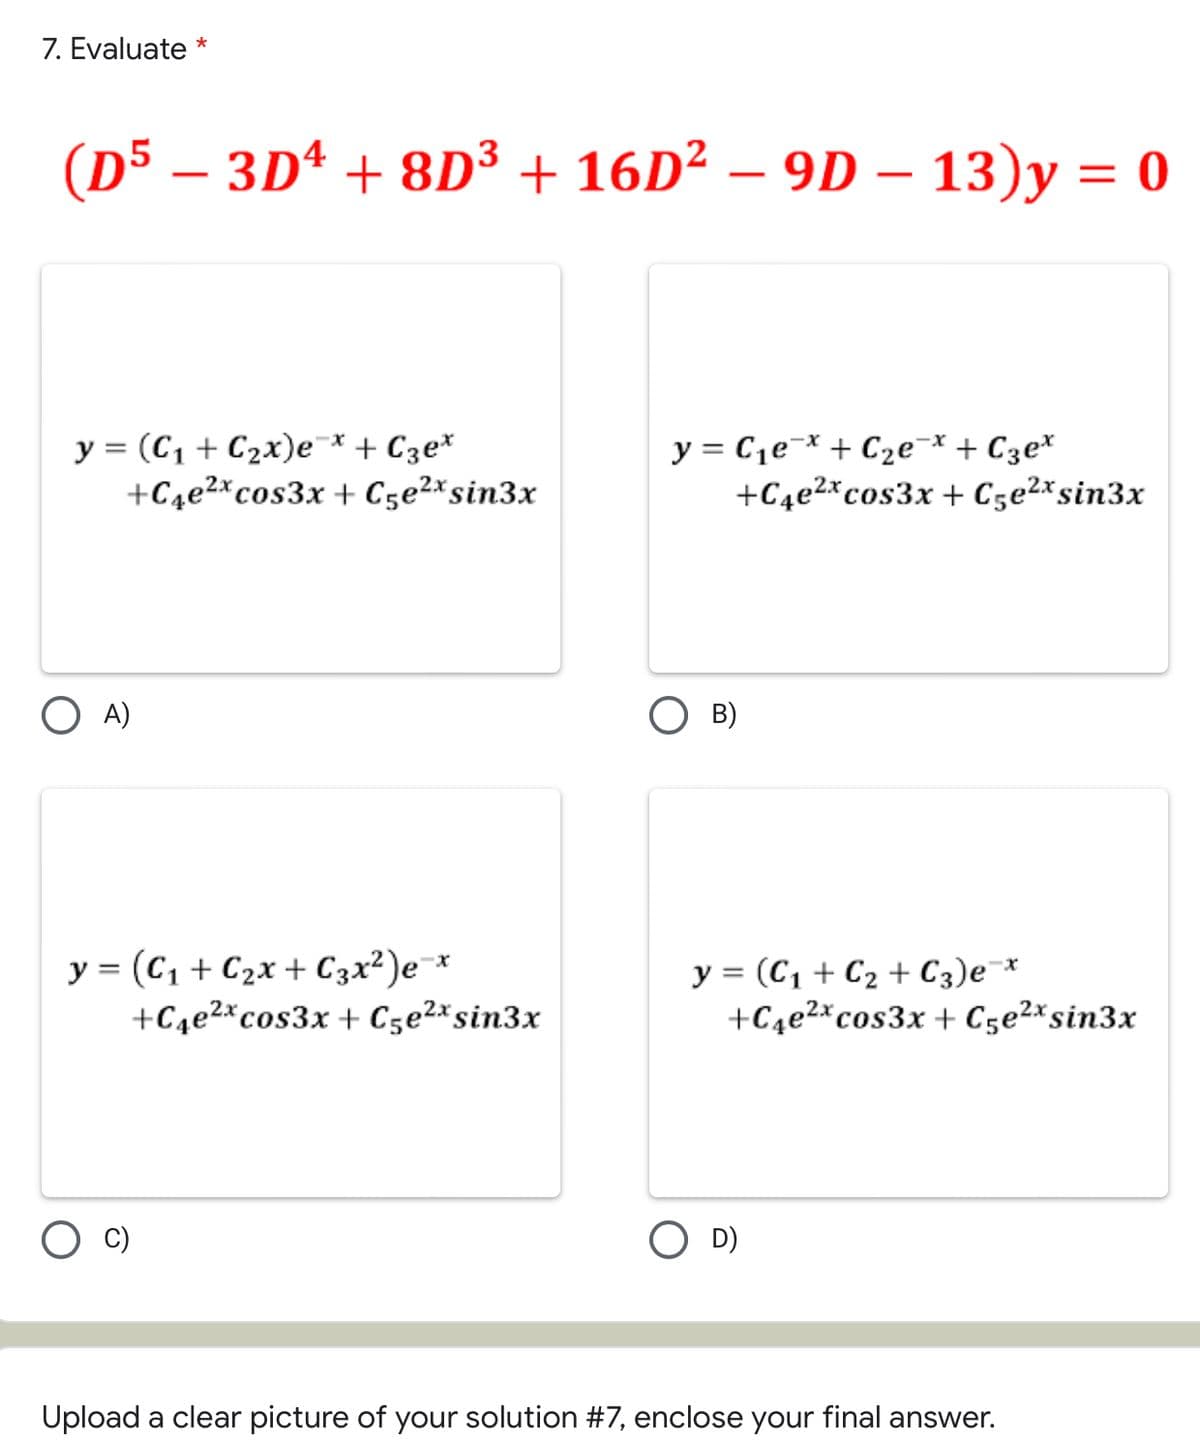 7. Evaluate *
(D5 − 3D¹ + 8D³ + 16D² – 9D – 13)y = 0
y = (C₁+C₂x)e¯x + С3ex
+C4e²x cos3x +C5e²x sin3x
y = C₁еx + C₂е¯x + С3e*
+C4e²x cos3x +C5e²x sin3x
OA)
OB)
y = (C₁ + C₂x + C 3 x ²)e=x
+C4e²x cos3x +C5e²x sin3x
y = (C₁ + C₂ + С3) ex
+C4e²x cos3x +C5e²x sin3x
D)
Upload a clear picture of your solution #7, enclose your final answer.